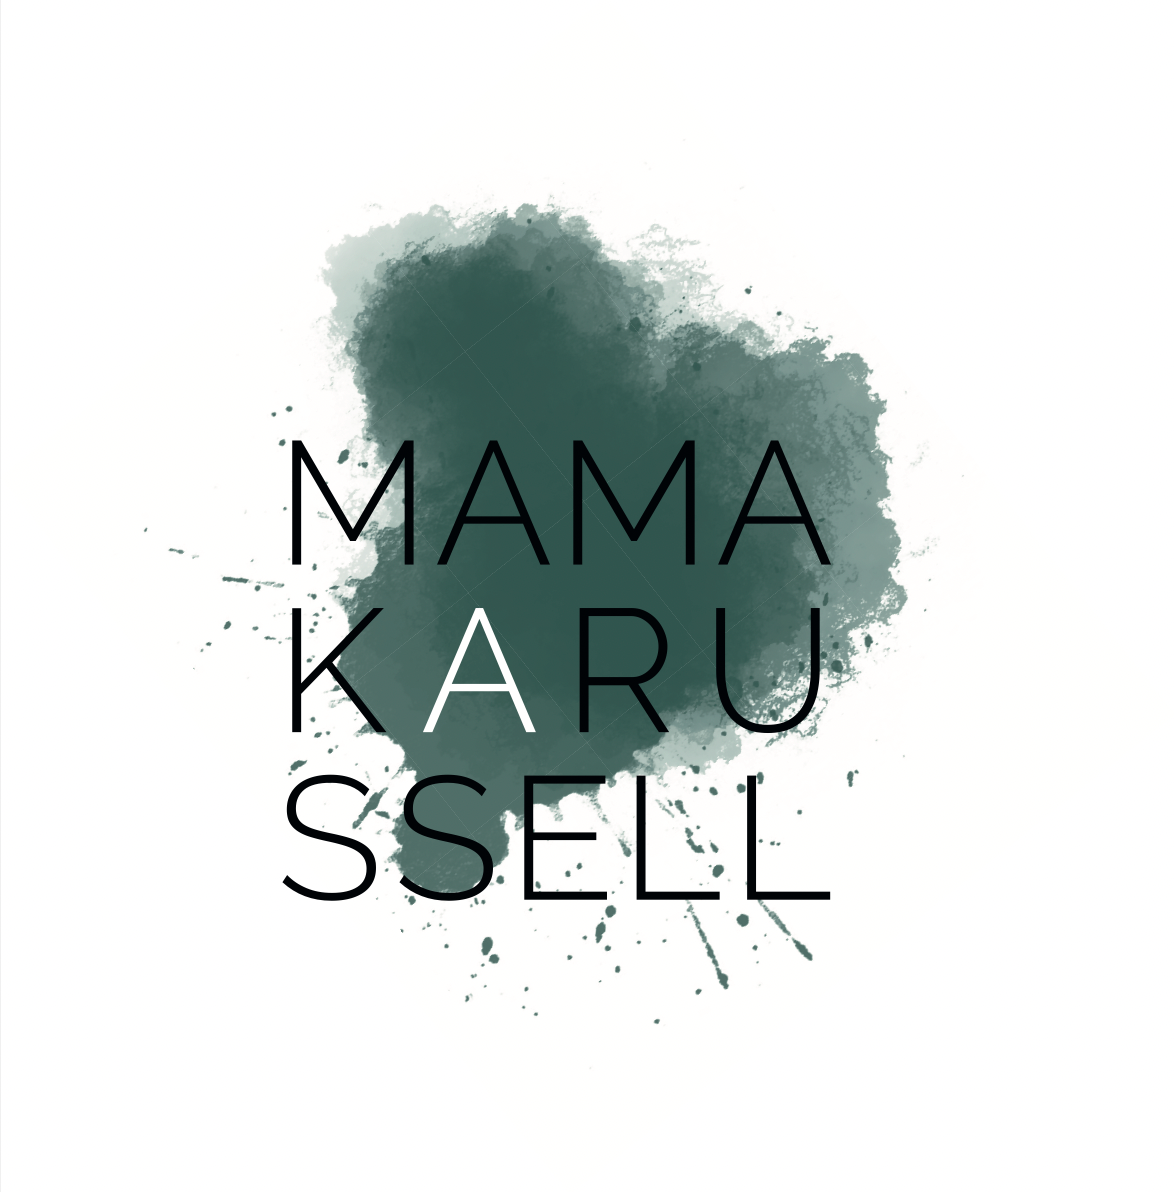 Mamakarussell